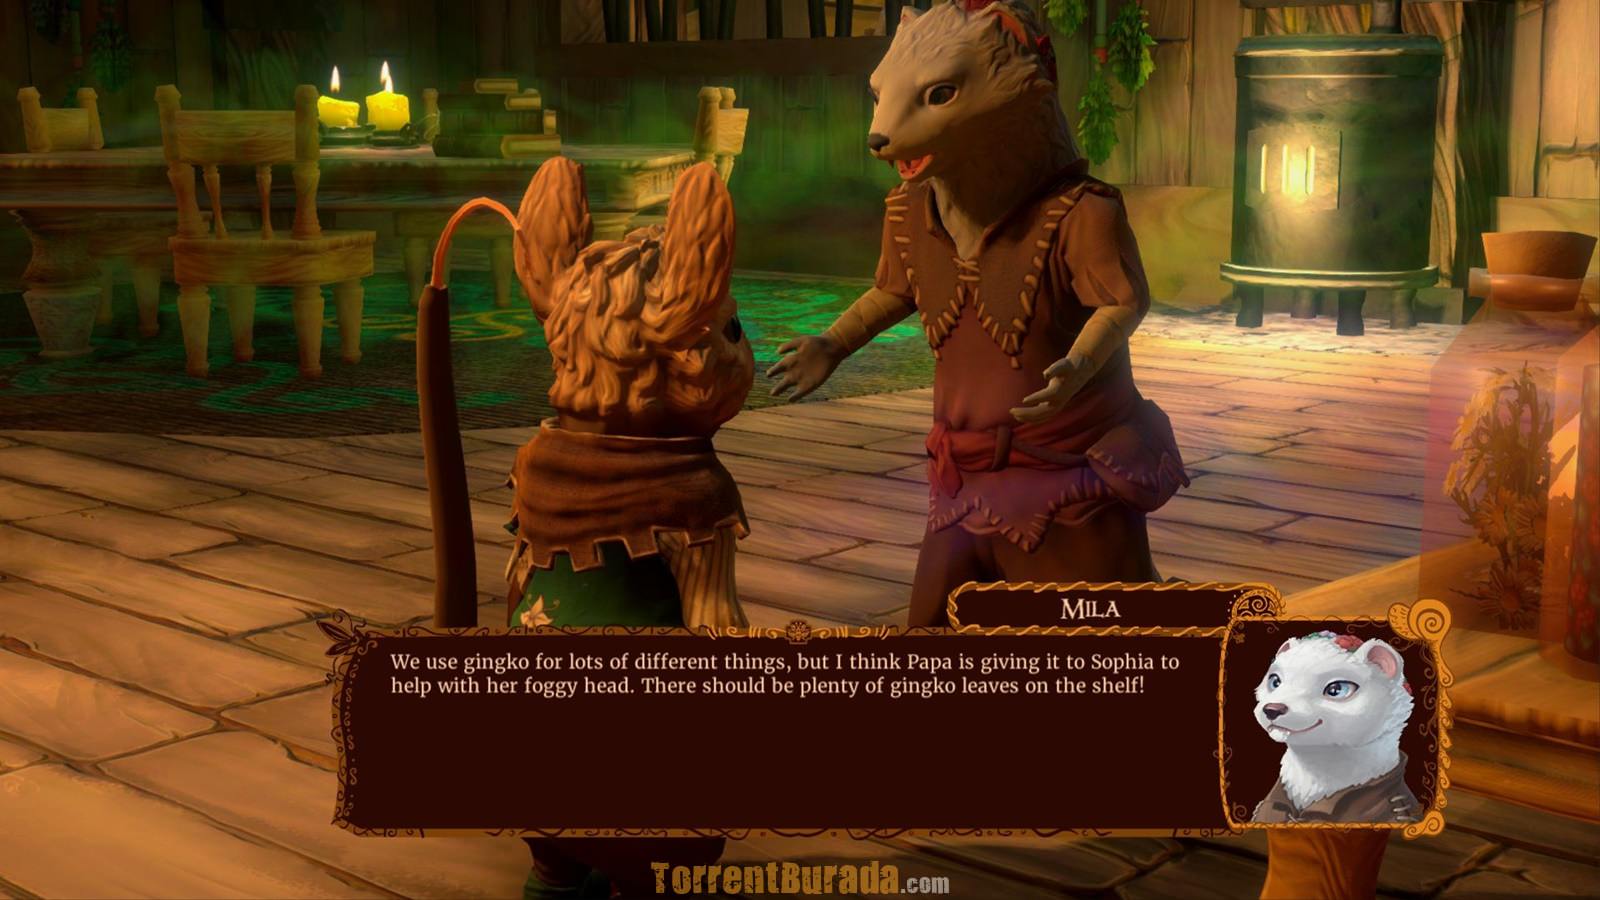 The Lost Legends of Redwall The Scout Act 3 İndir - Torrent